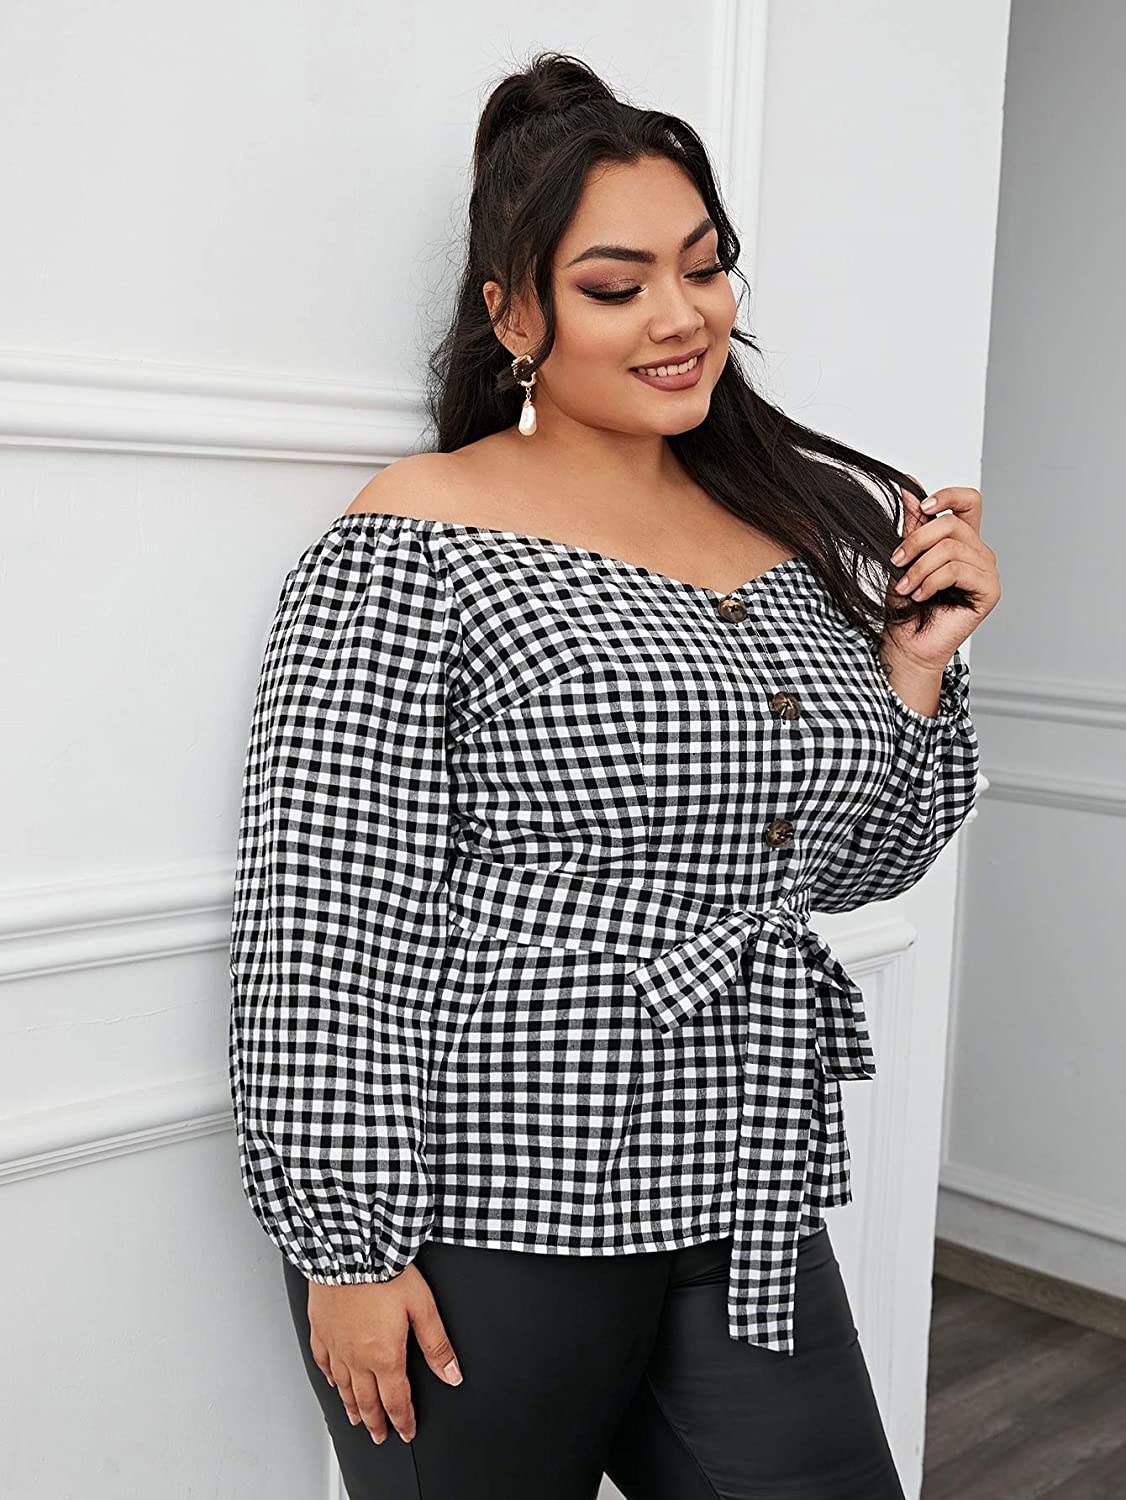 model wearing the gingham top